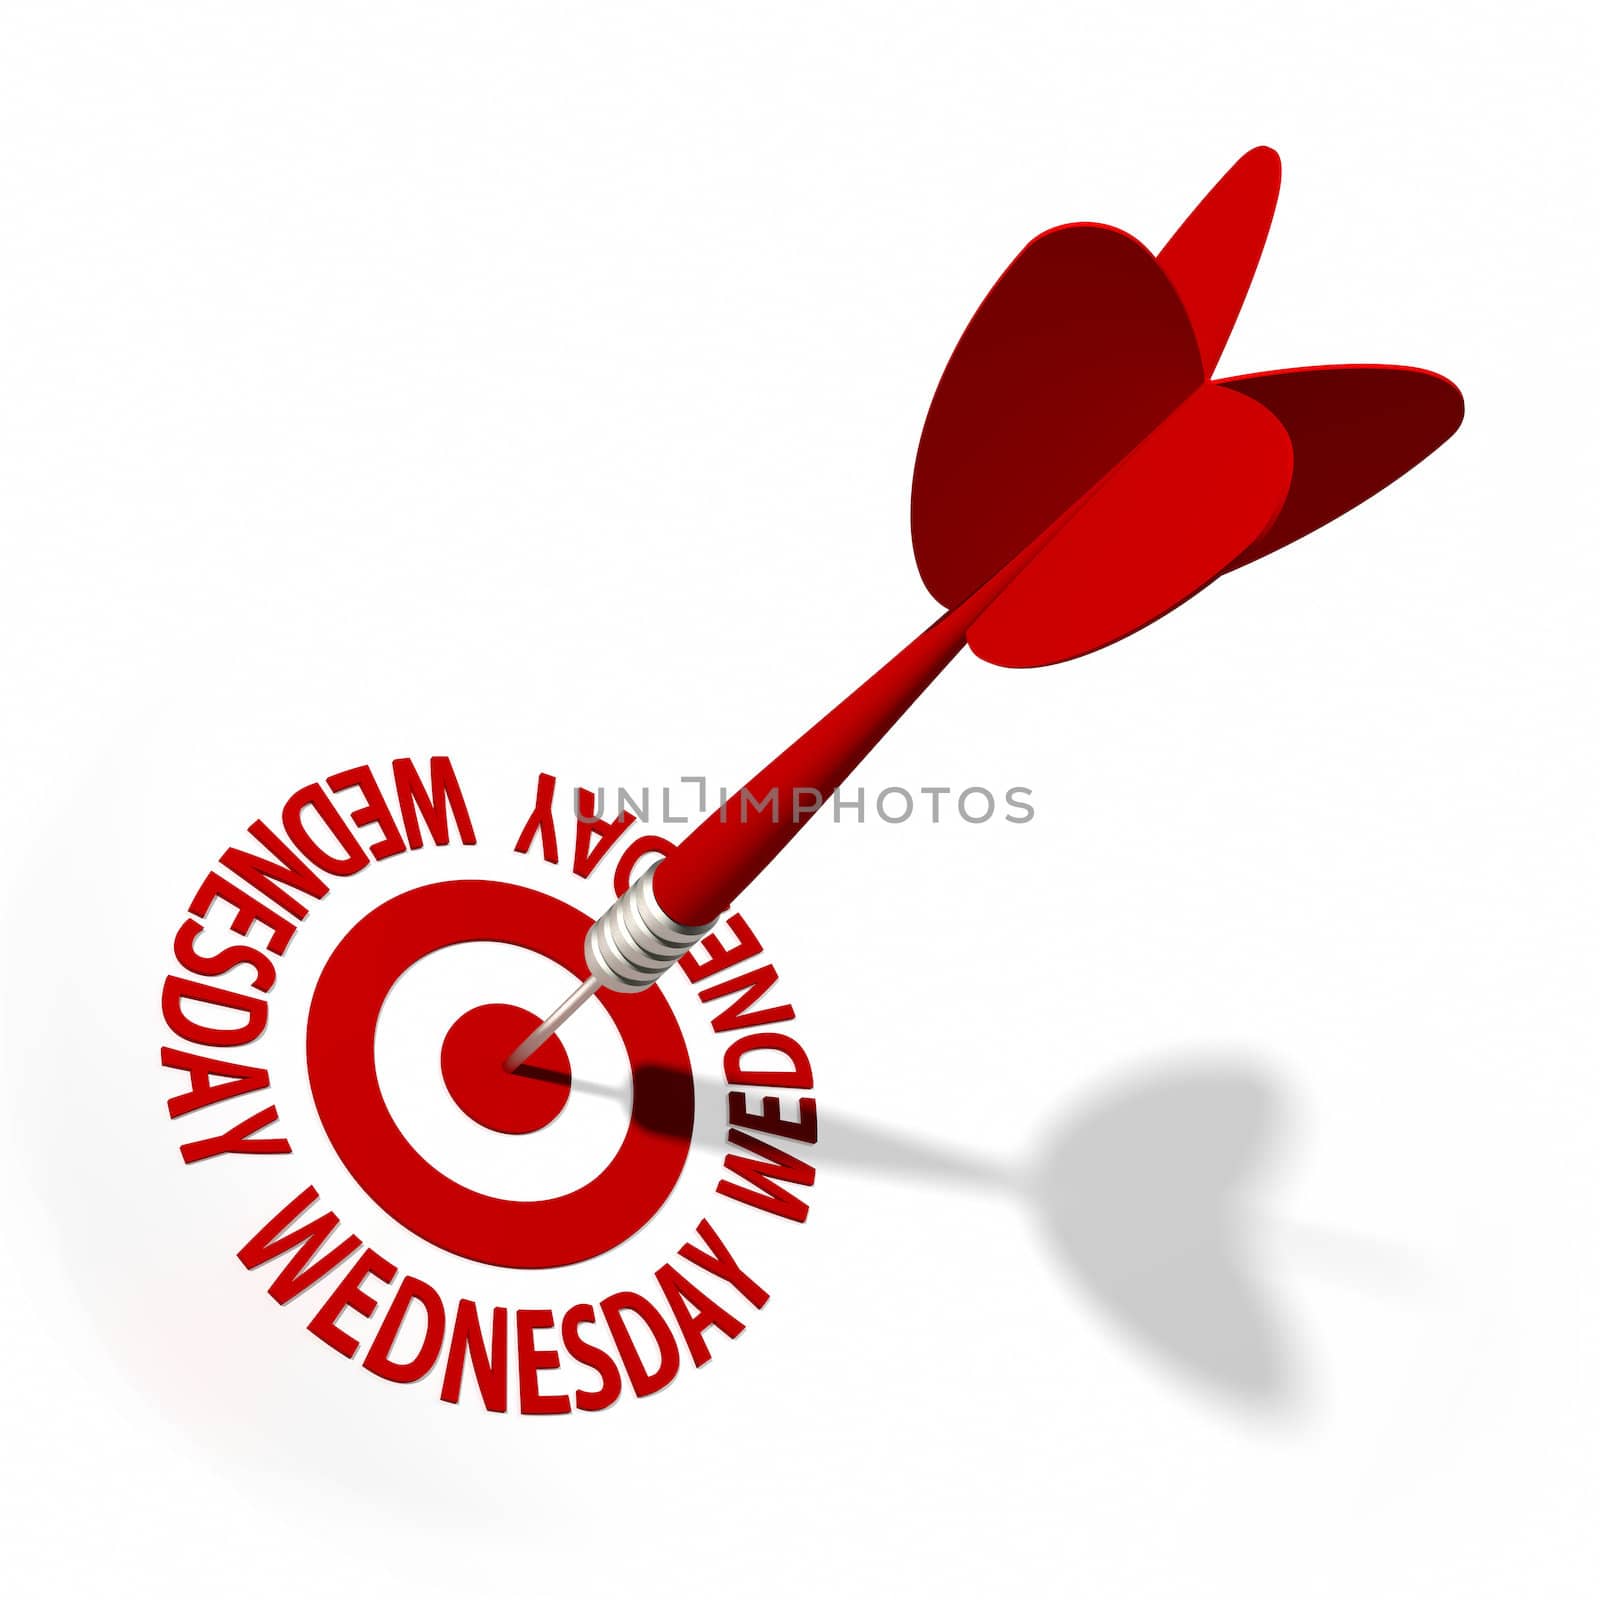 Wednesday Target by OutStyle